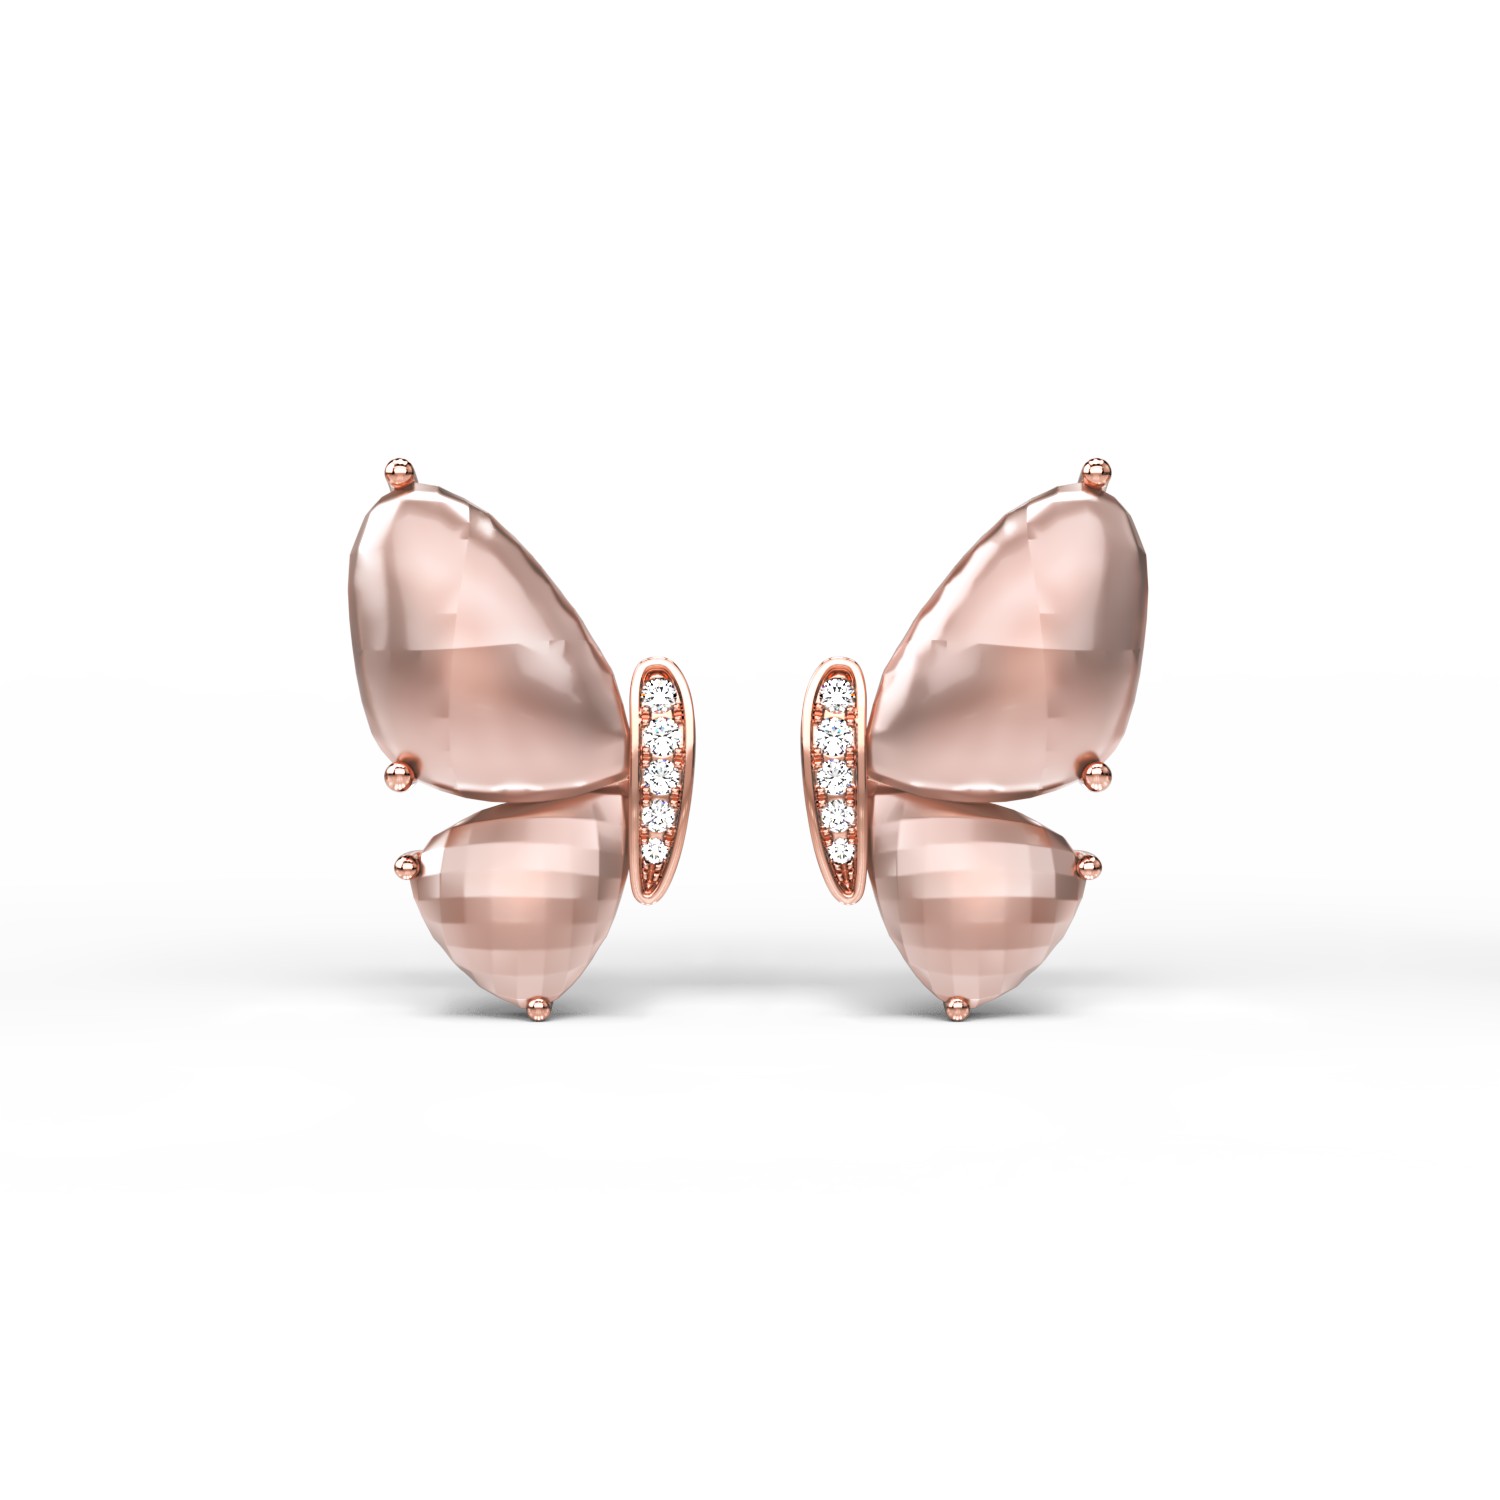 18K rose gold butterfly earrings with rose quartz of 8.2ct and diamonds of 0.06ct